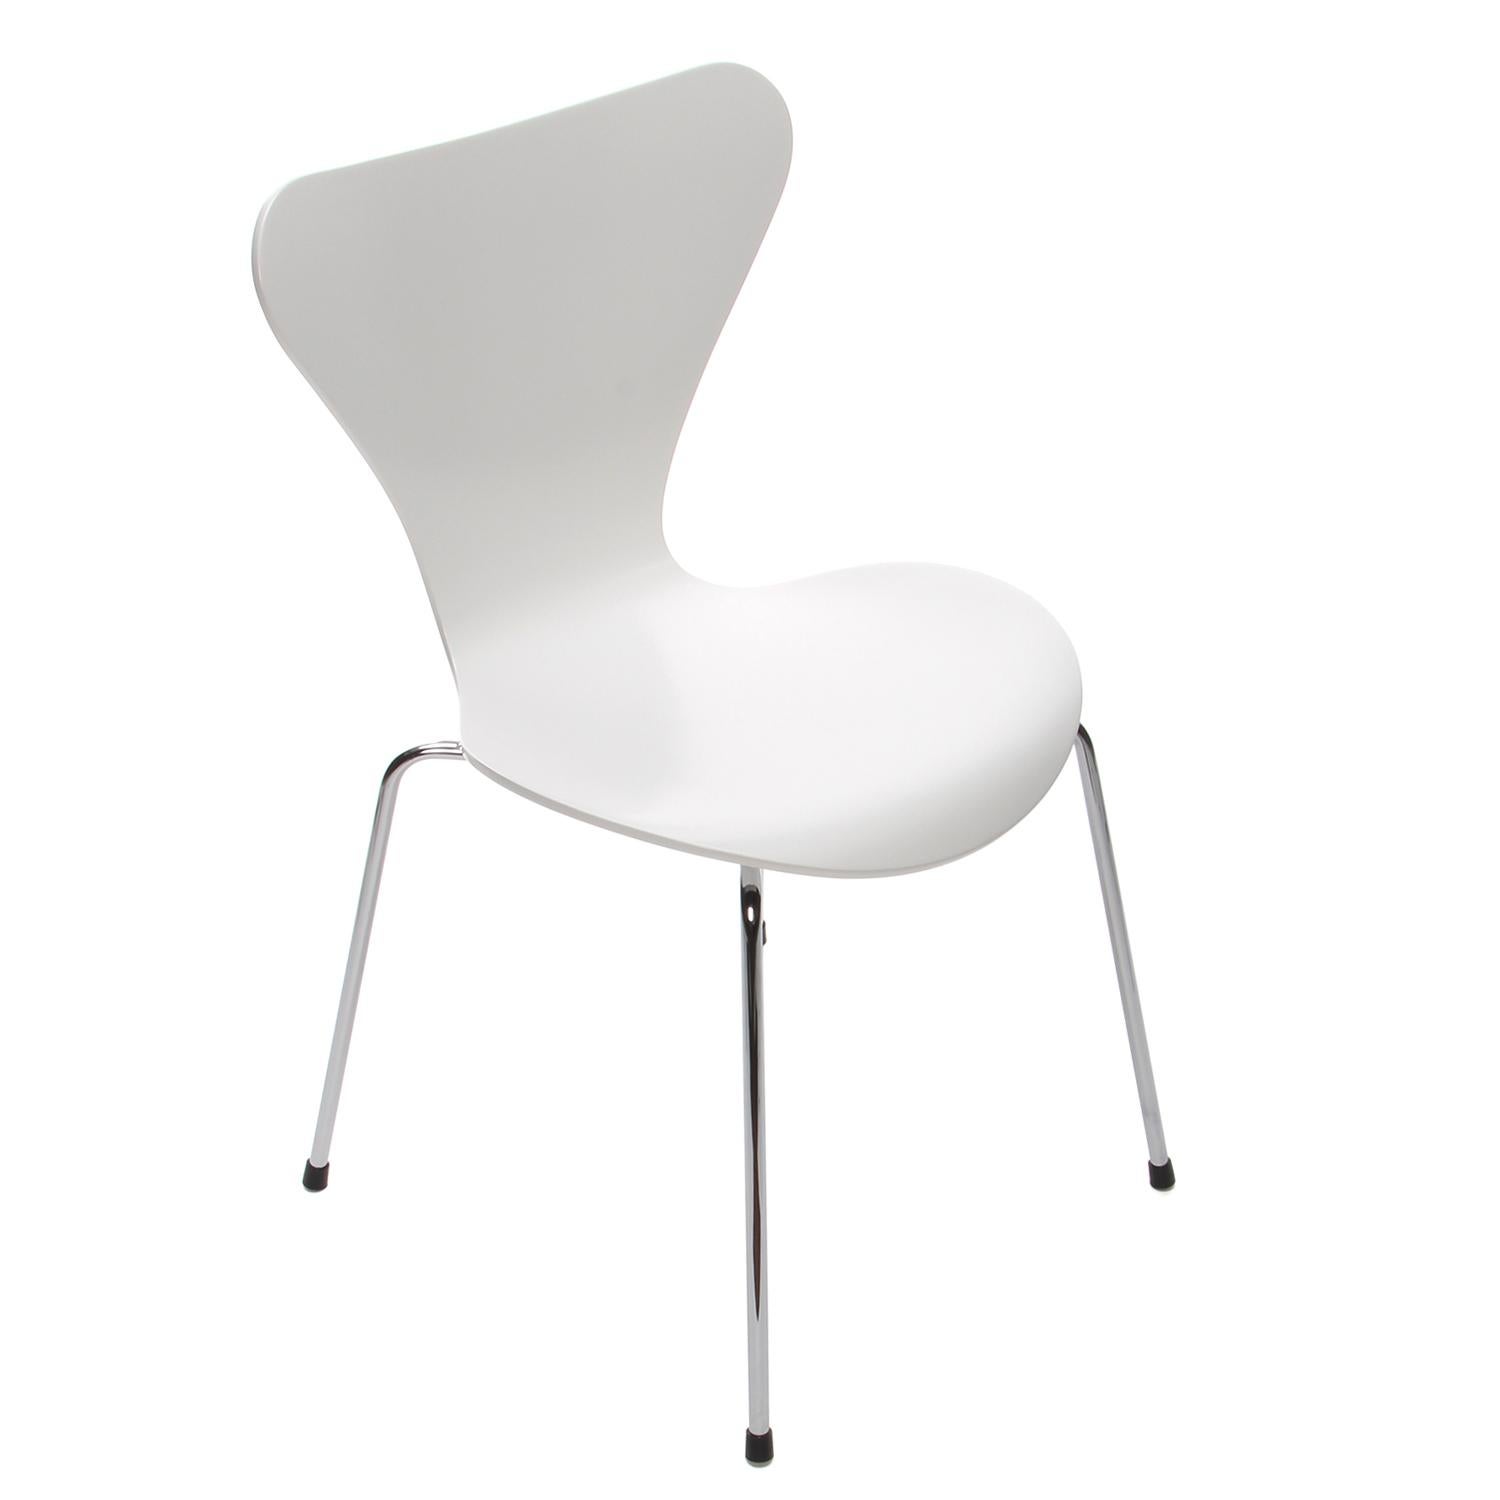 We have 4 of these iconic chairs in white lacquer finish.

We have 4 original vintage (labeled production year 1989) Series 7 chairs, fully restored and re-lacquered in a silk semi-gloss white finish (the original Fritz Hansen white) - done by the